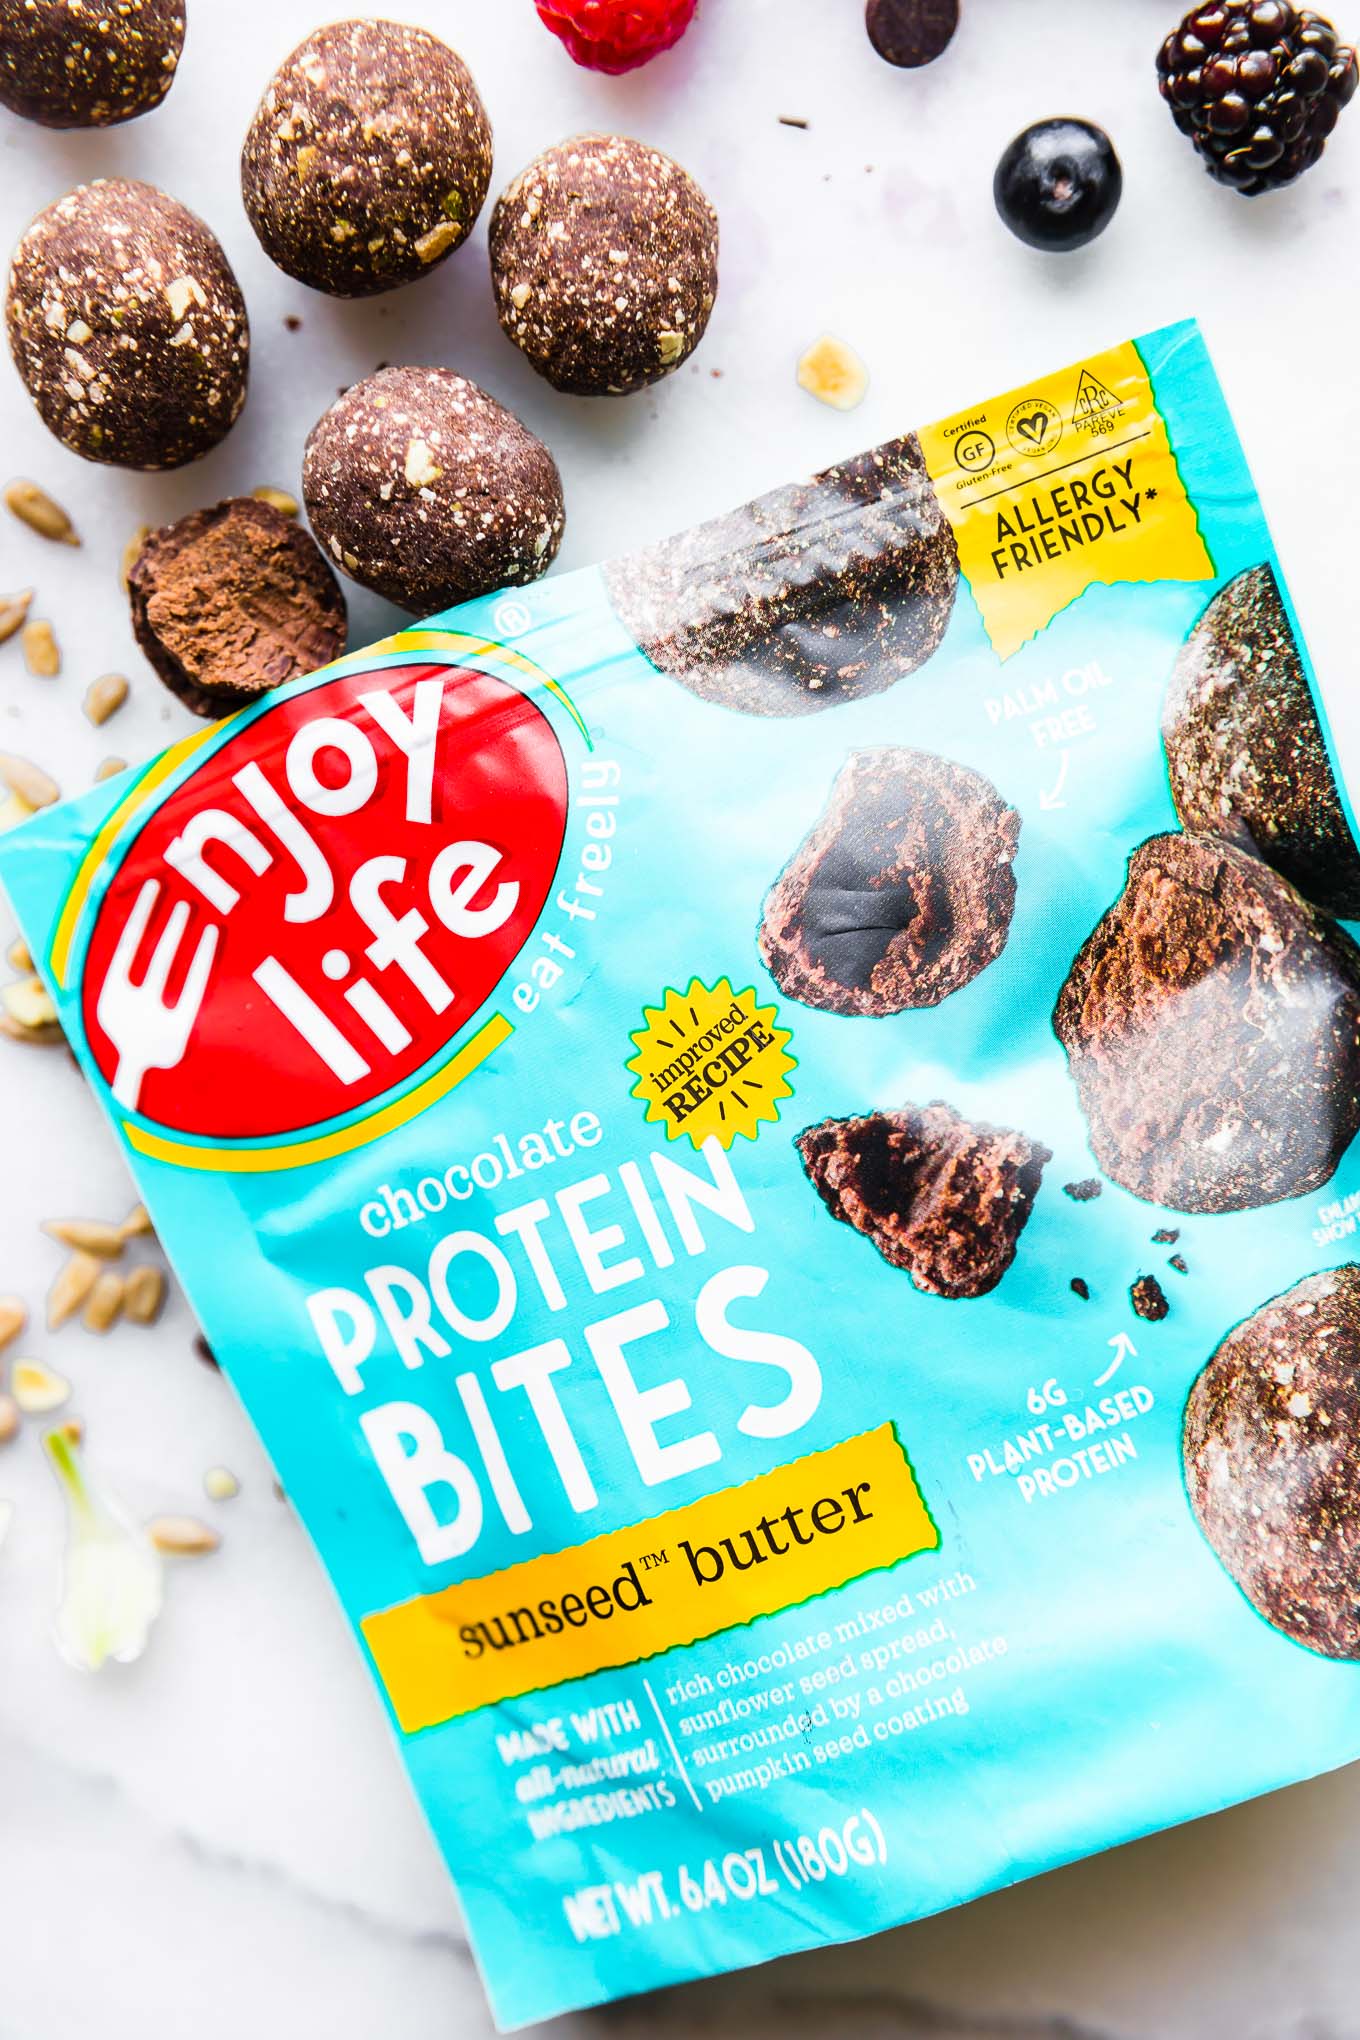 Enjoy Life brand protein bites bag with a few bites out of bag on counter.